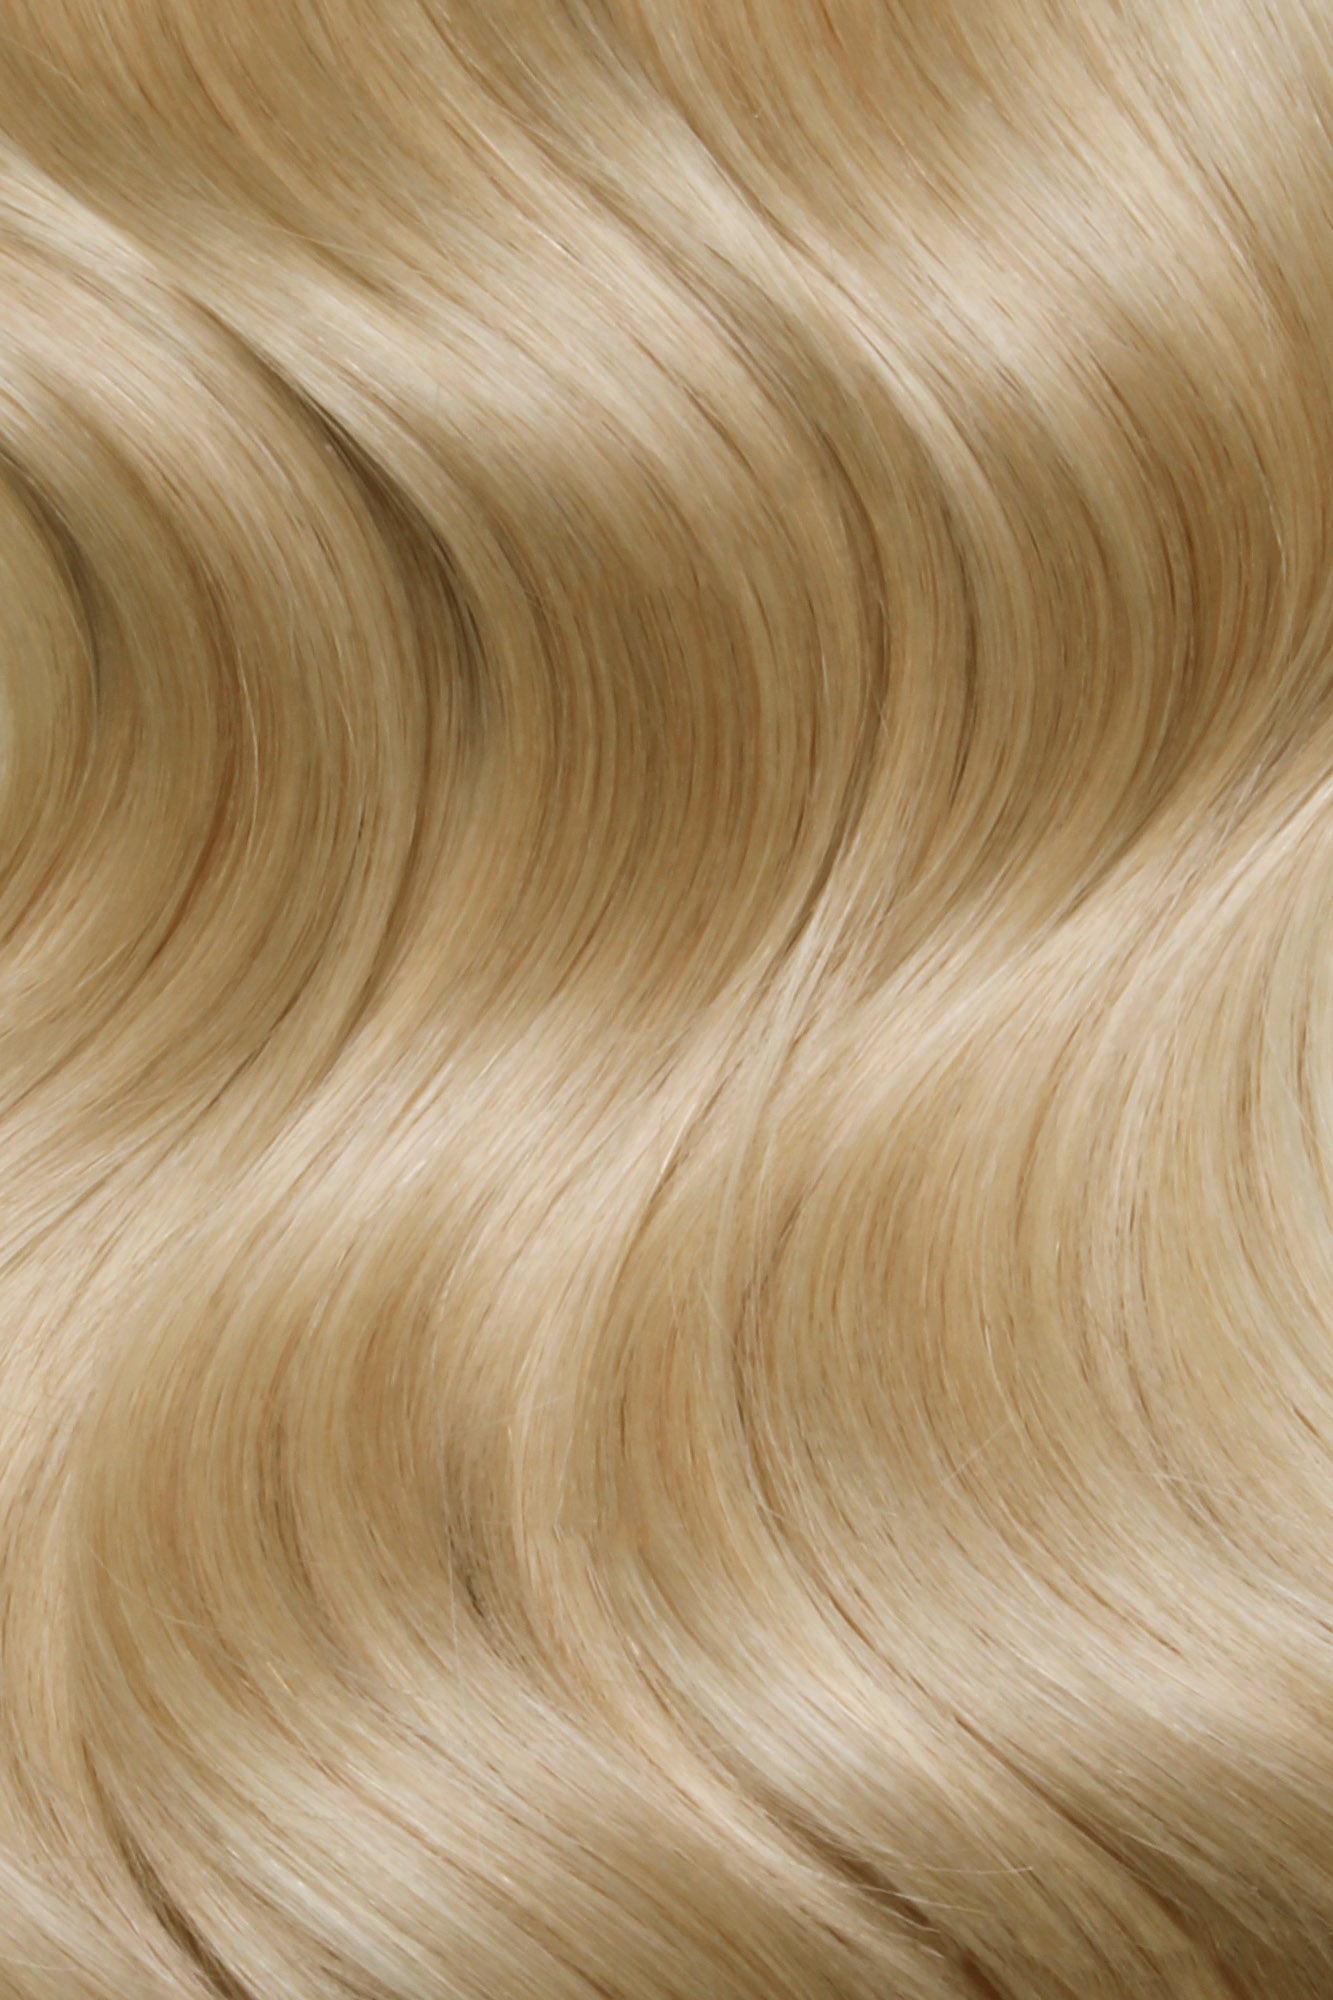 Tiny Tip Bonds 22&quot; - SWAY Hair Extensions Natural-Ash-Blonde: Lightweight, discreet. Made with Italian Keratin for comfort and long-lasting wear. Reusable and compatible with other SWAY Salon Professional Methods